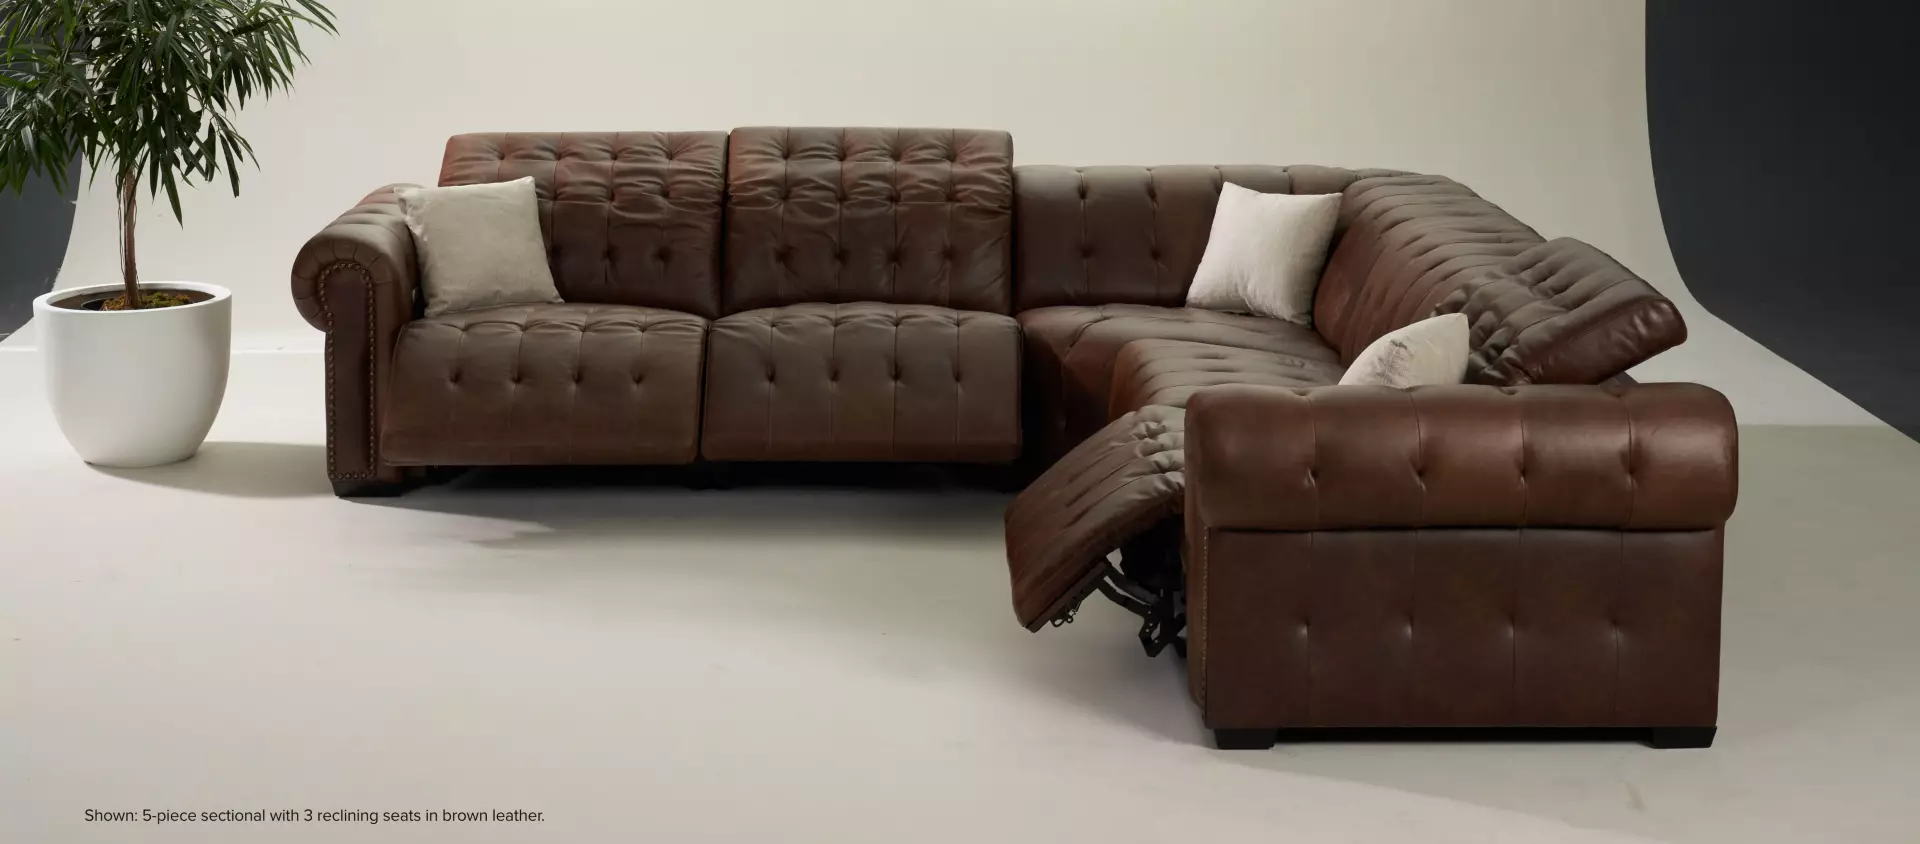 Windsor Park 5-piece sectional with 3 reclining seats in brown leather.